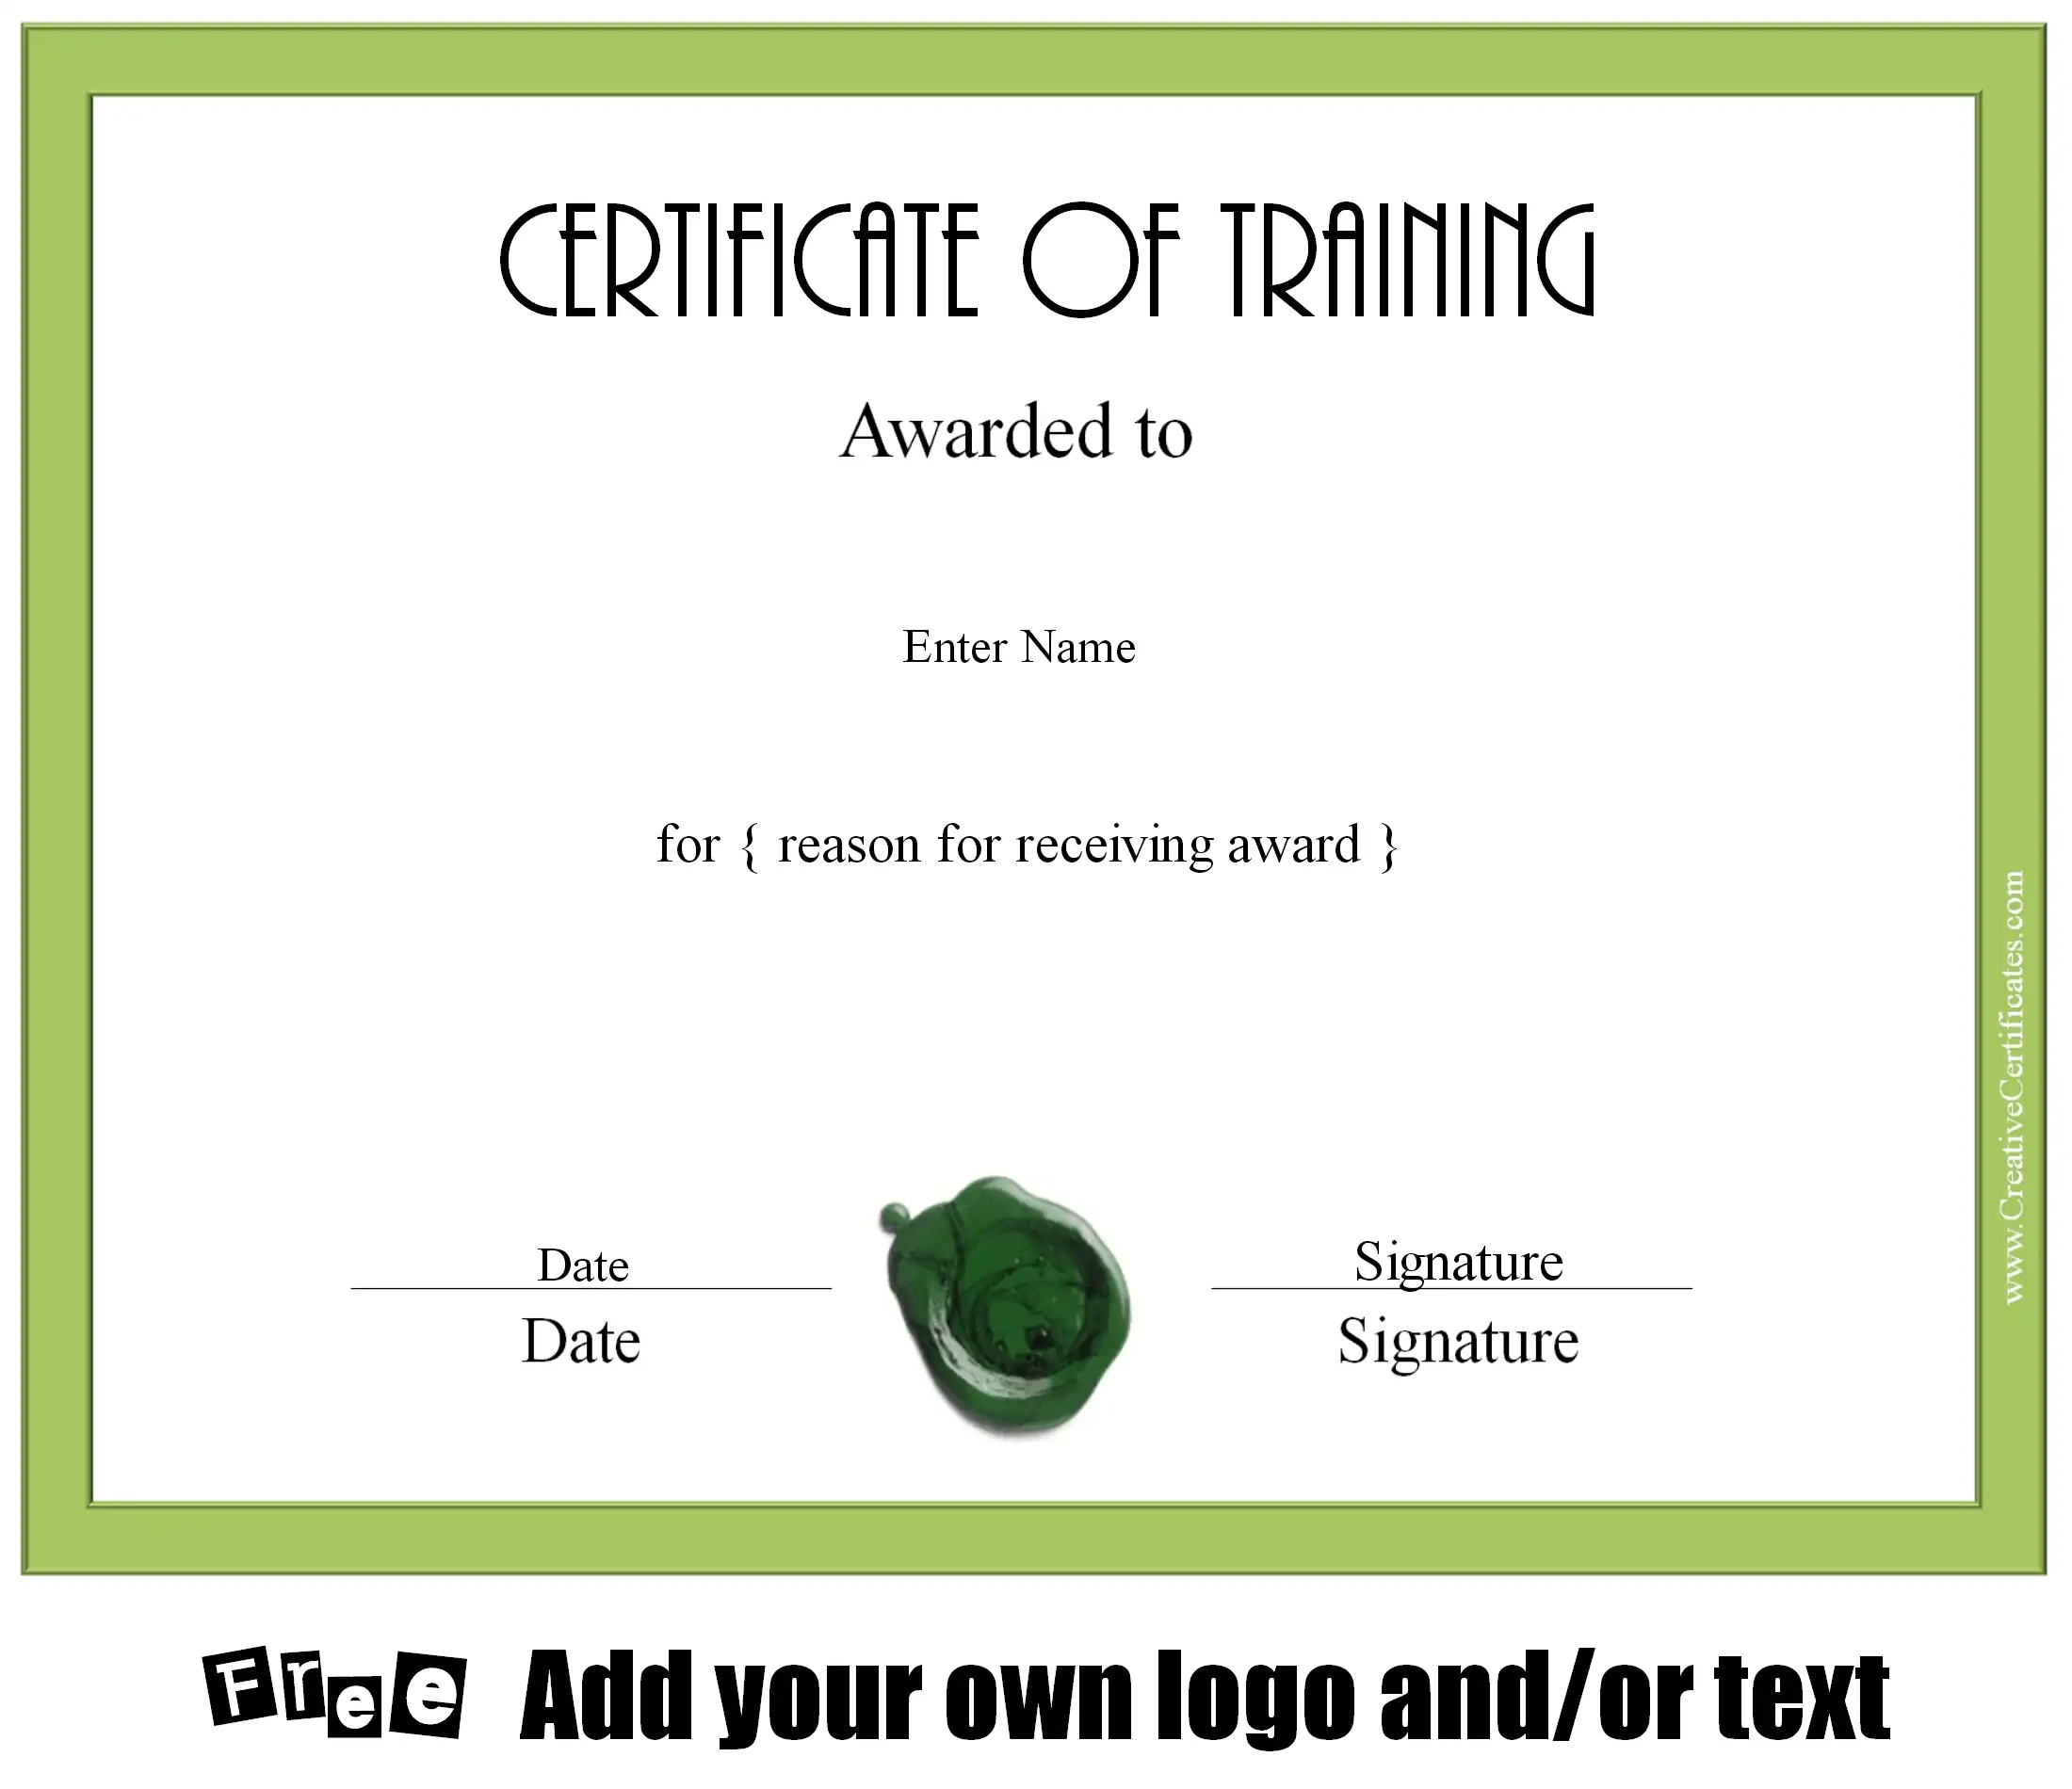 Participation in training